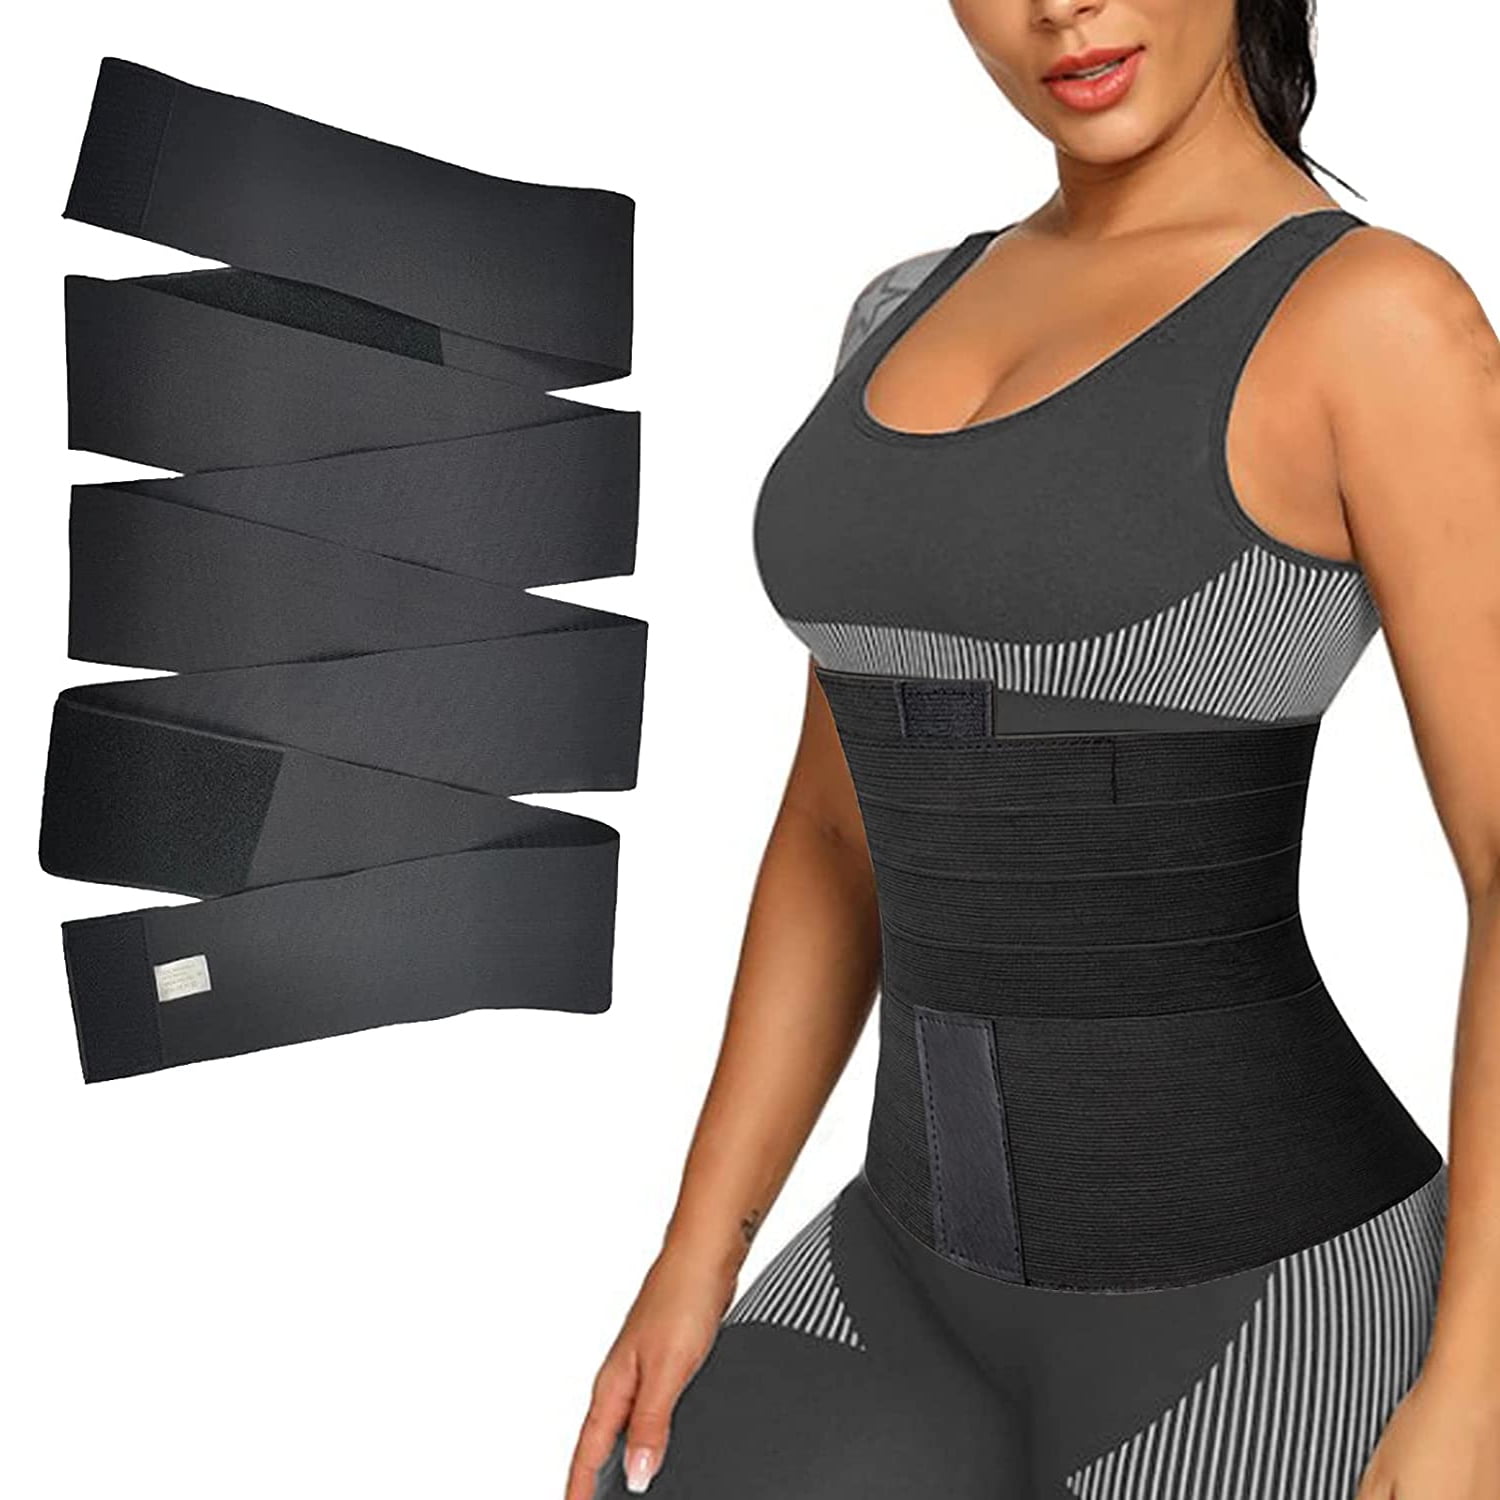 Trimmer Belt Invisible Waist Wrap Trainer Tape with Loop Snatch Me Up Bandage Wrap Adjustable Wrapped Support Lumbar Waist Trainer for Women,Stomach/Belly/Tummy/Body Shaper Compression Wrap Black 